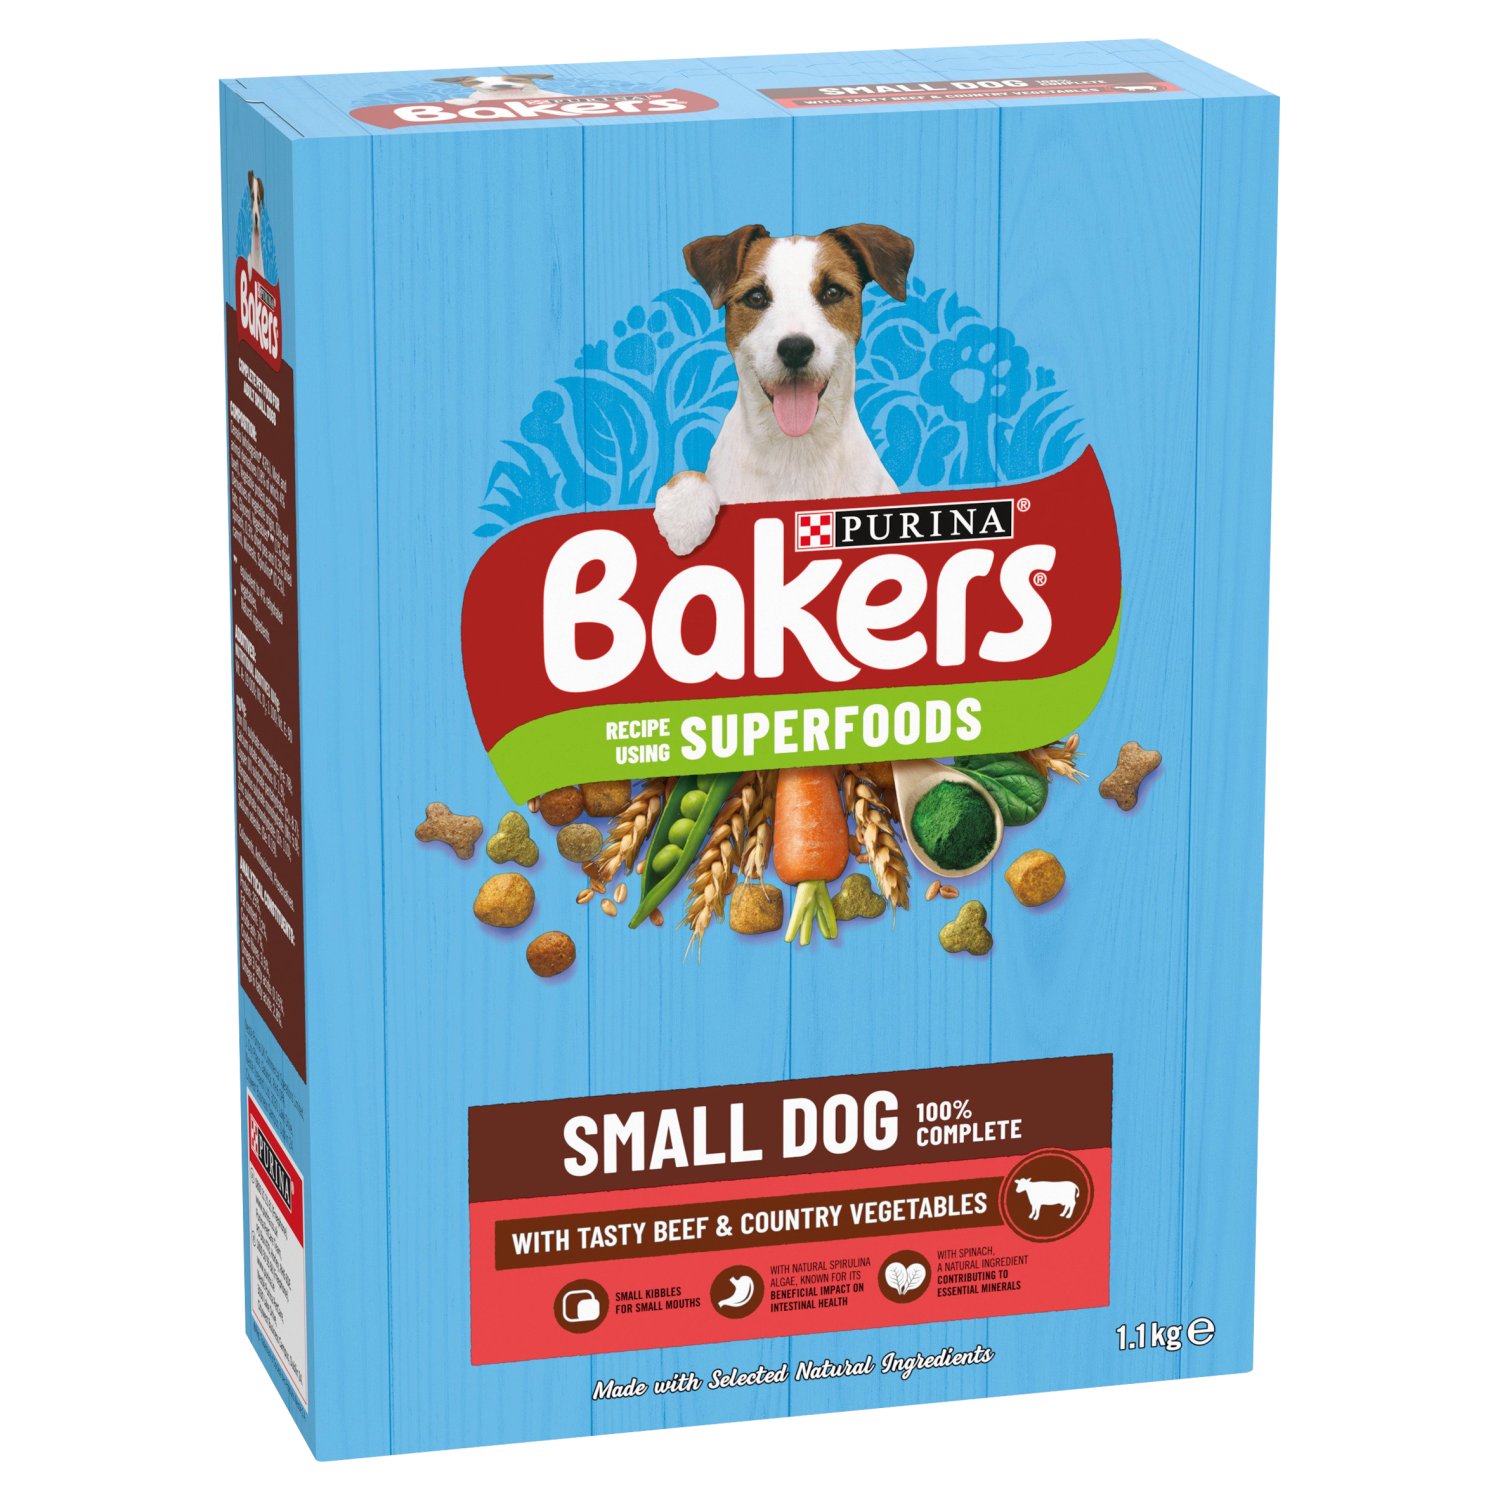 Bakers Beef and Vegetable Small Dog Dry Food (1.1 kg)